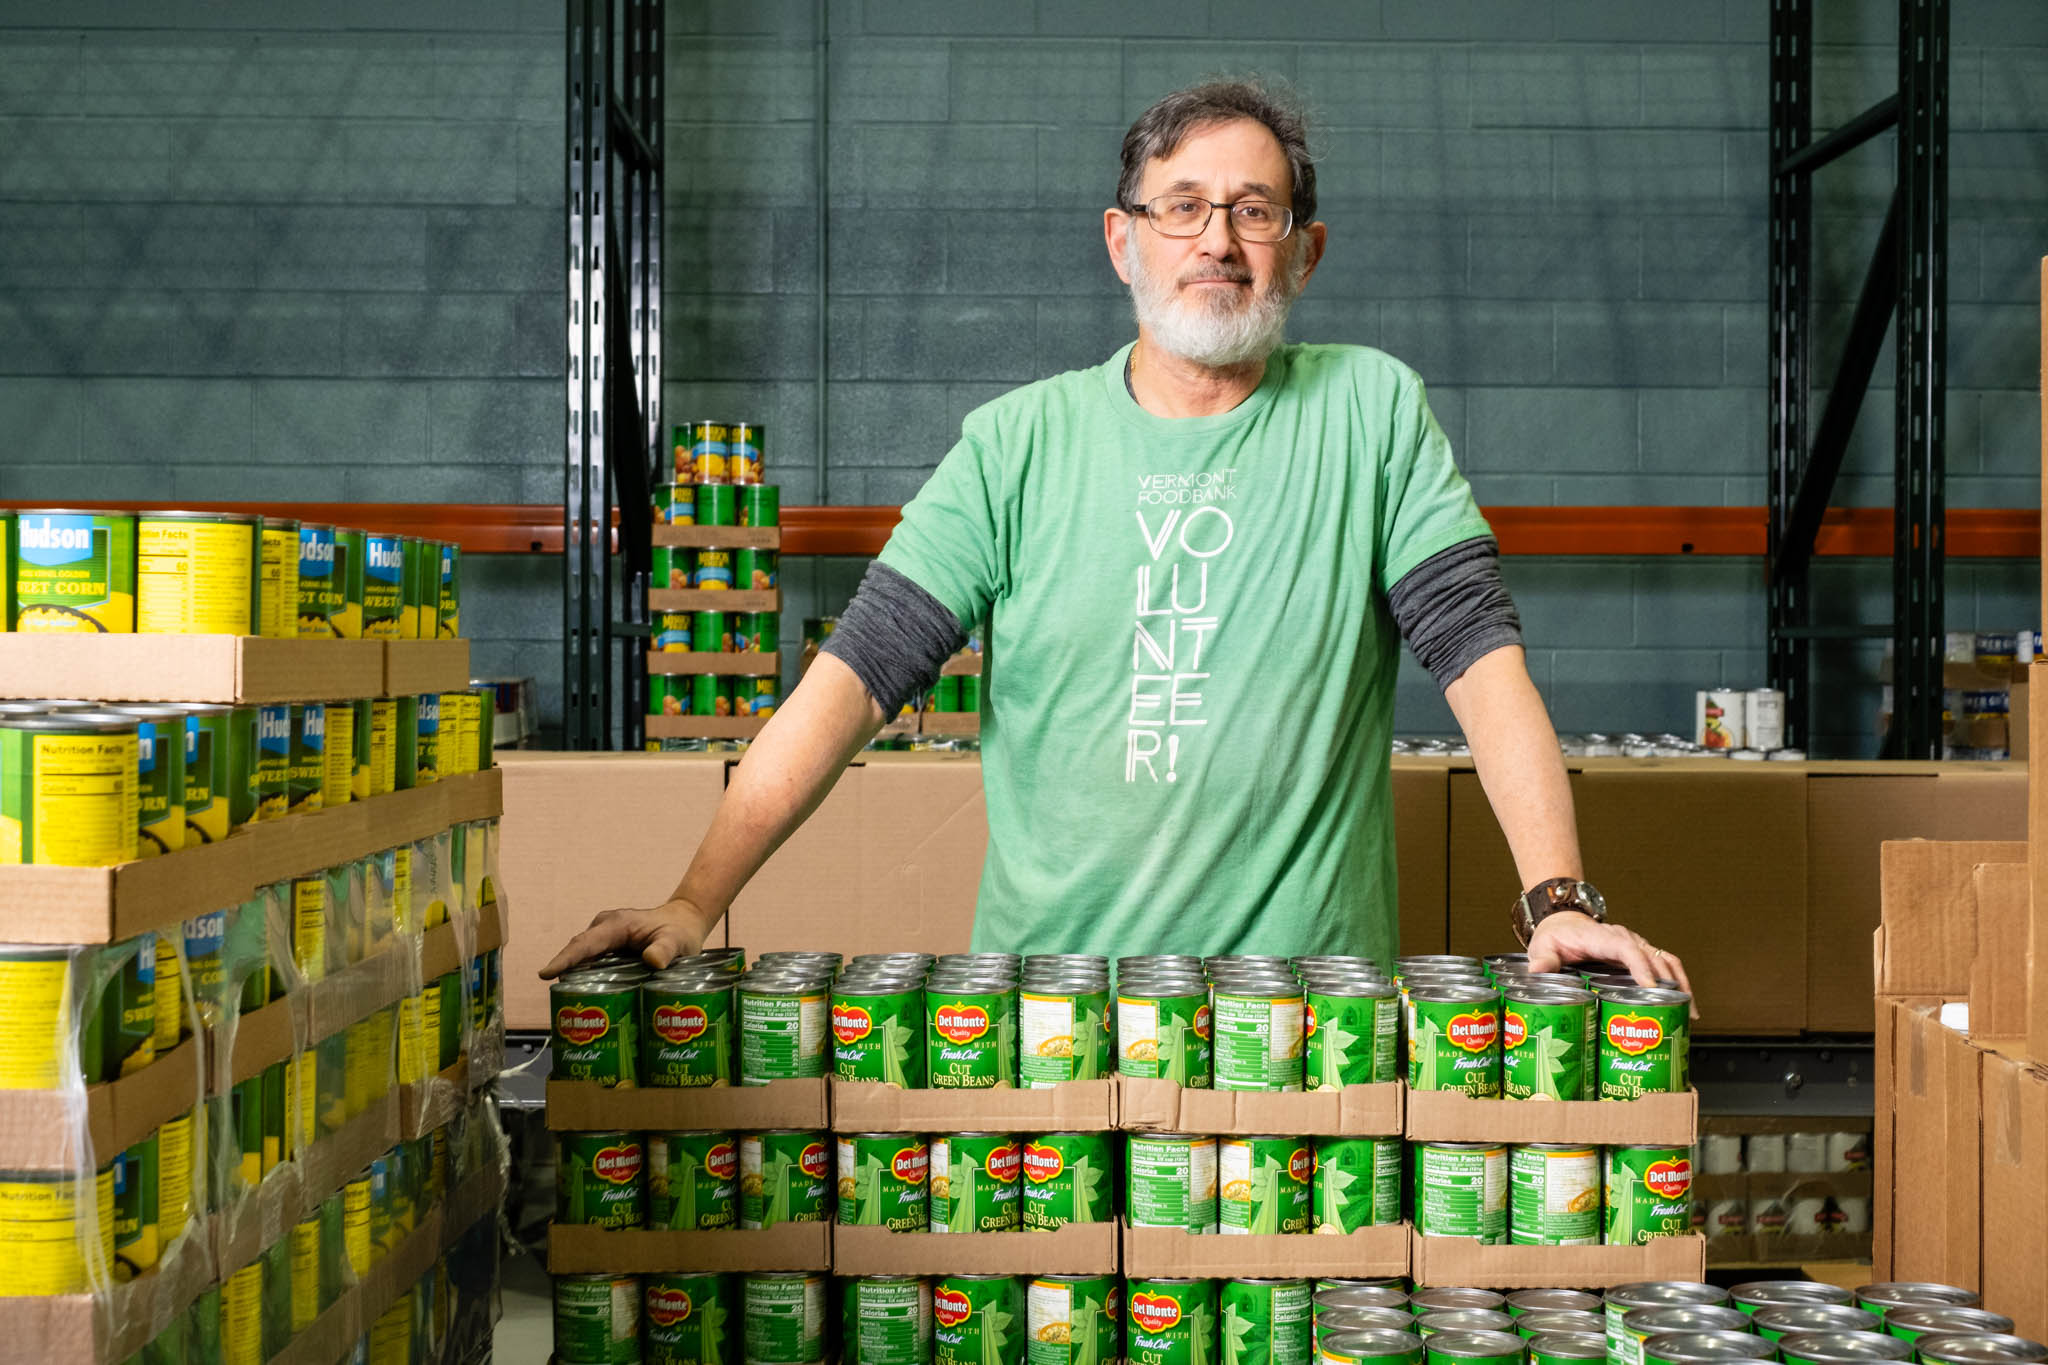 Peter is a volunteer at Vermont Foodbank who works weekly in the warehouse sorting and packing food for neighbors facing hunger.